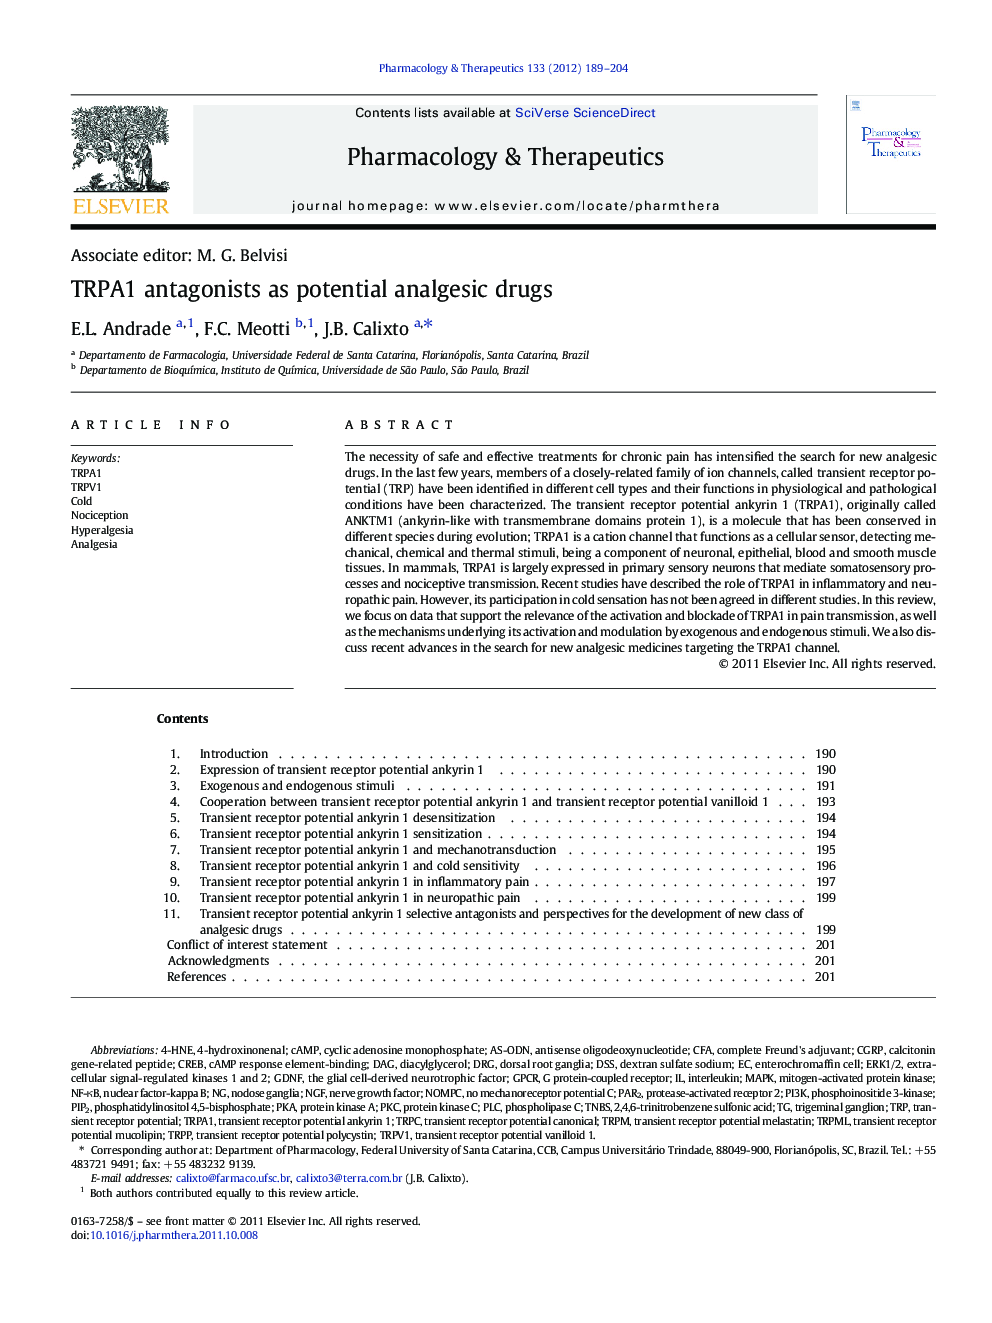 TRPA1 antagonists as potential analgesic drugs